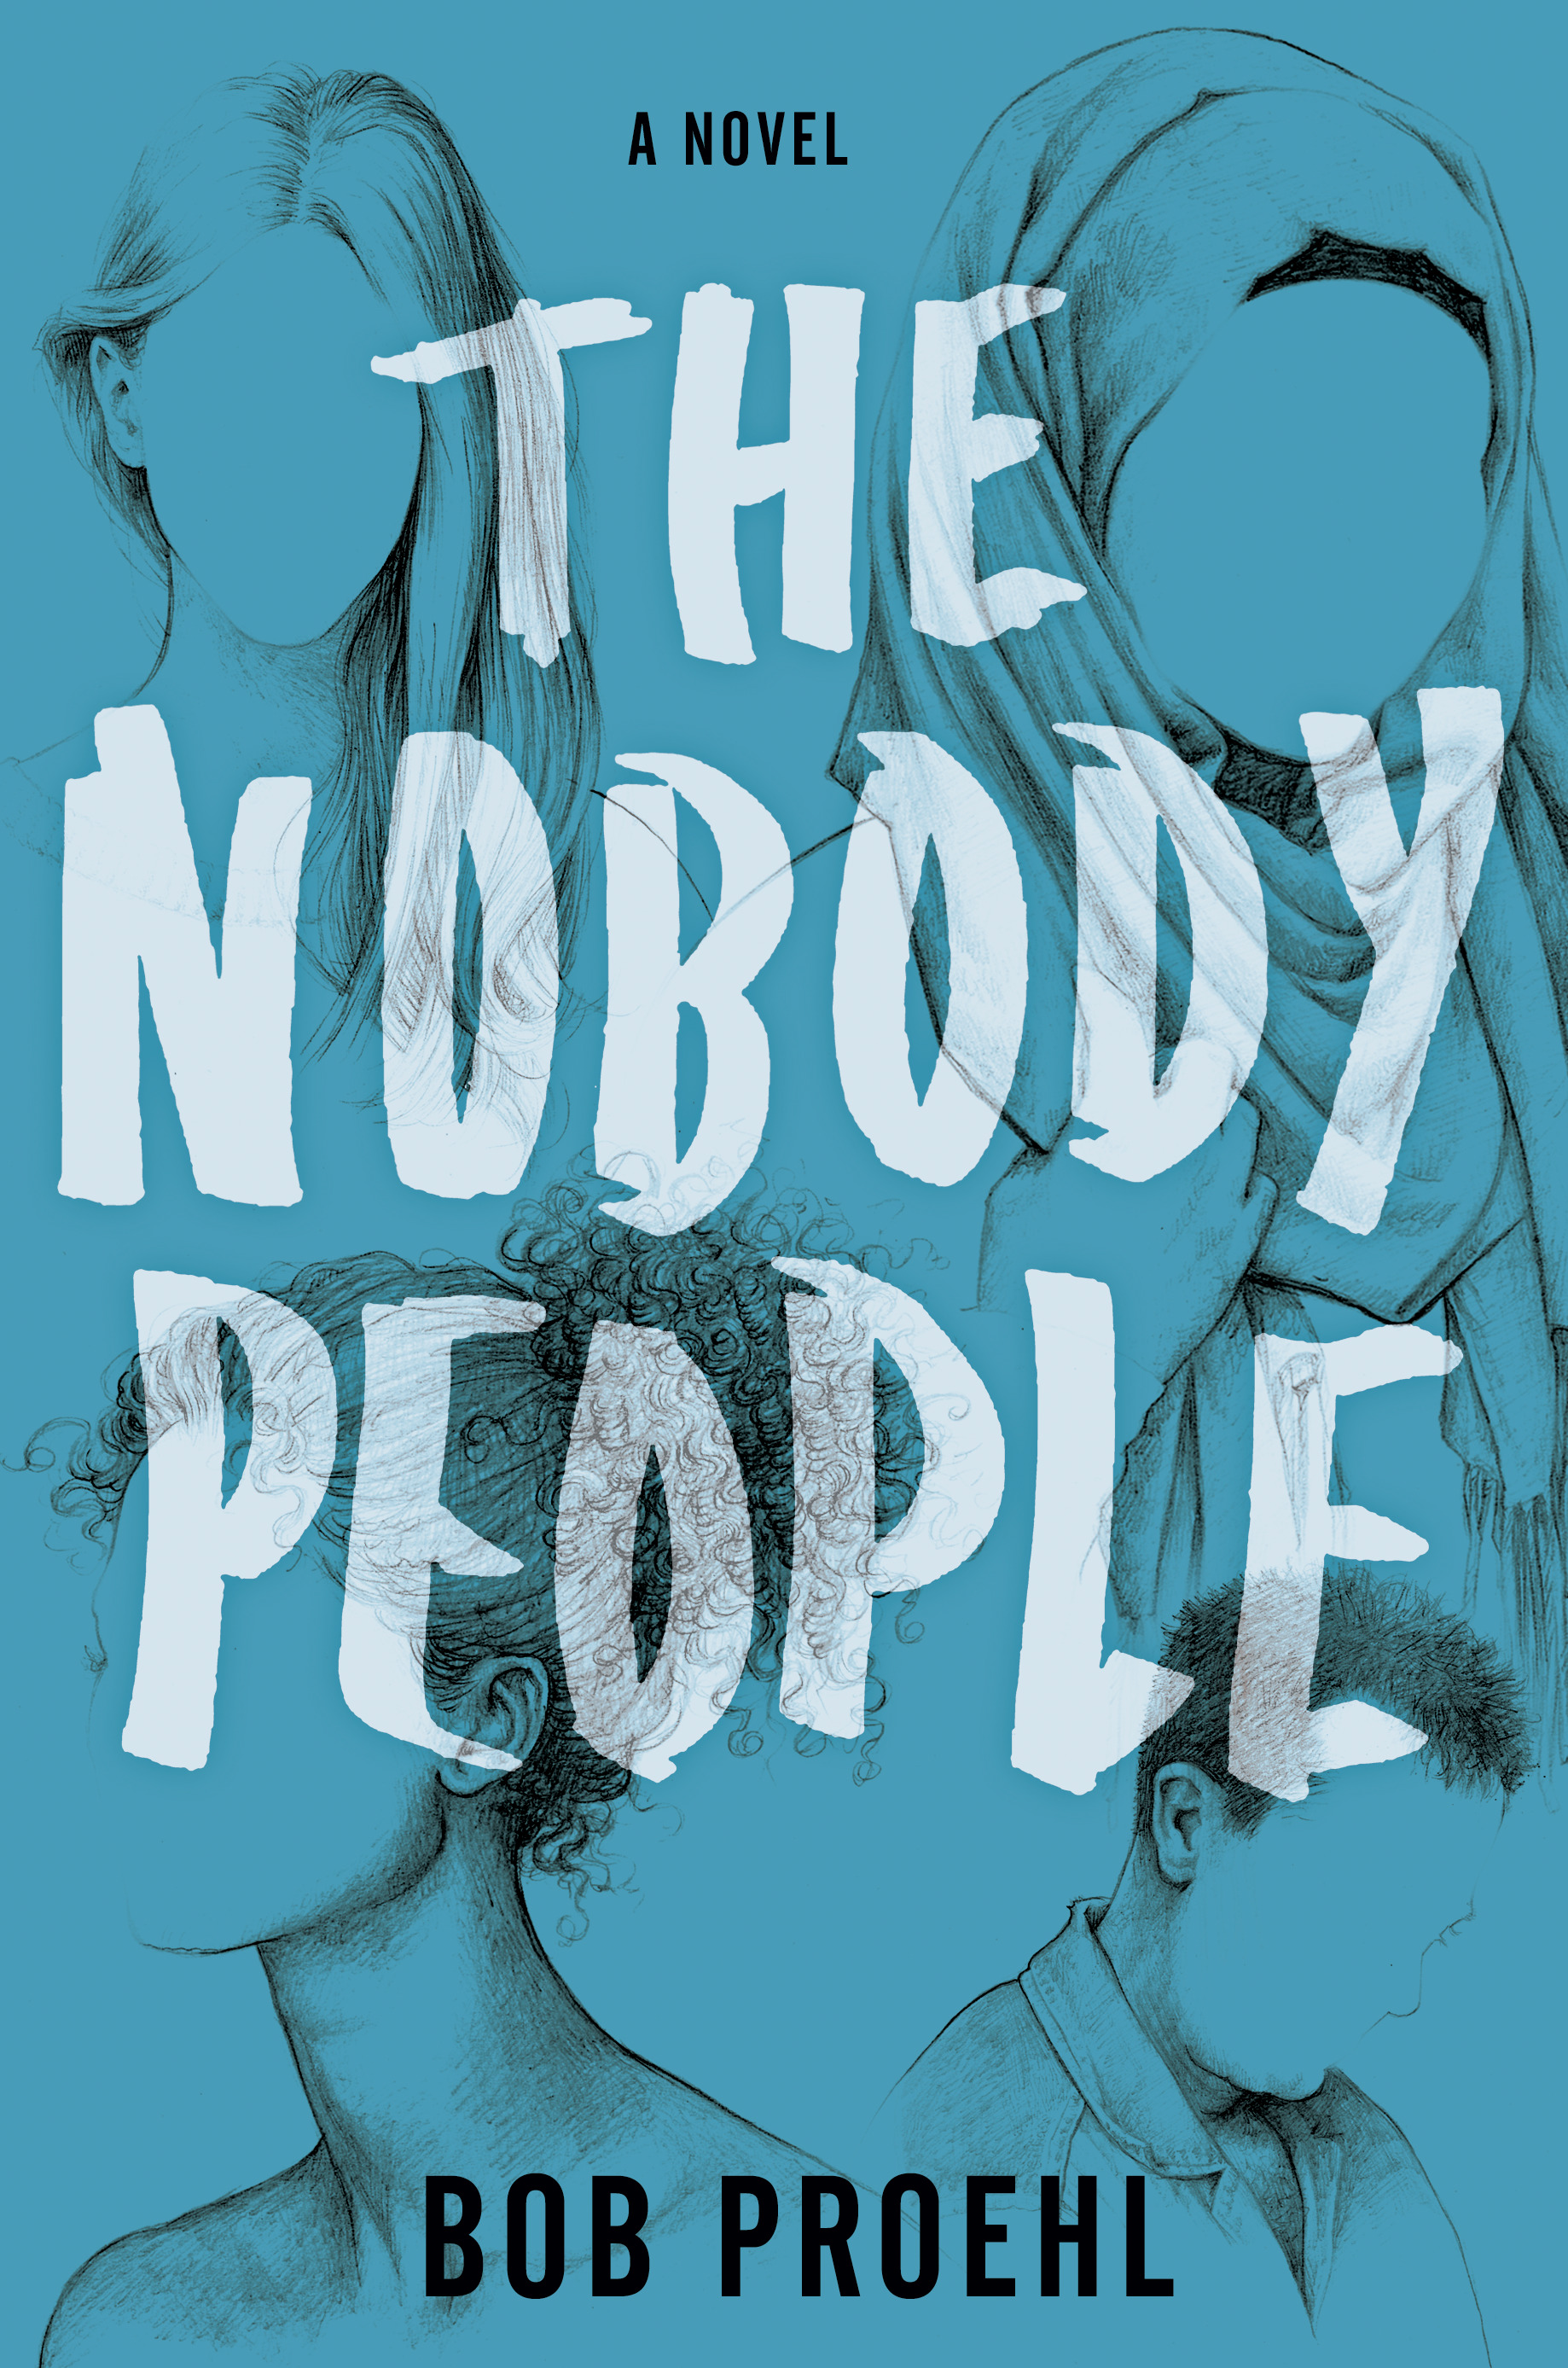 Blue book cover with four pencil sketches of faceless people and the title "The Nobody People" in large white translucent letters over the drawings.